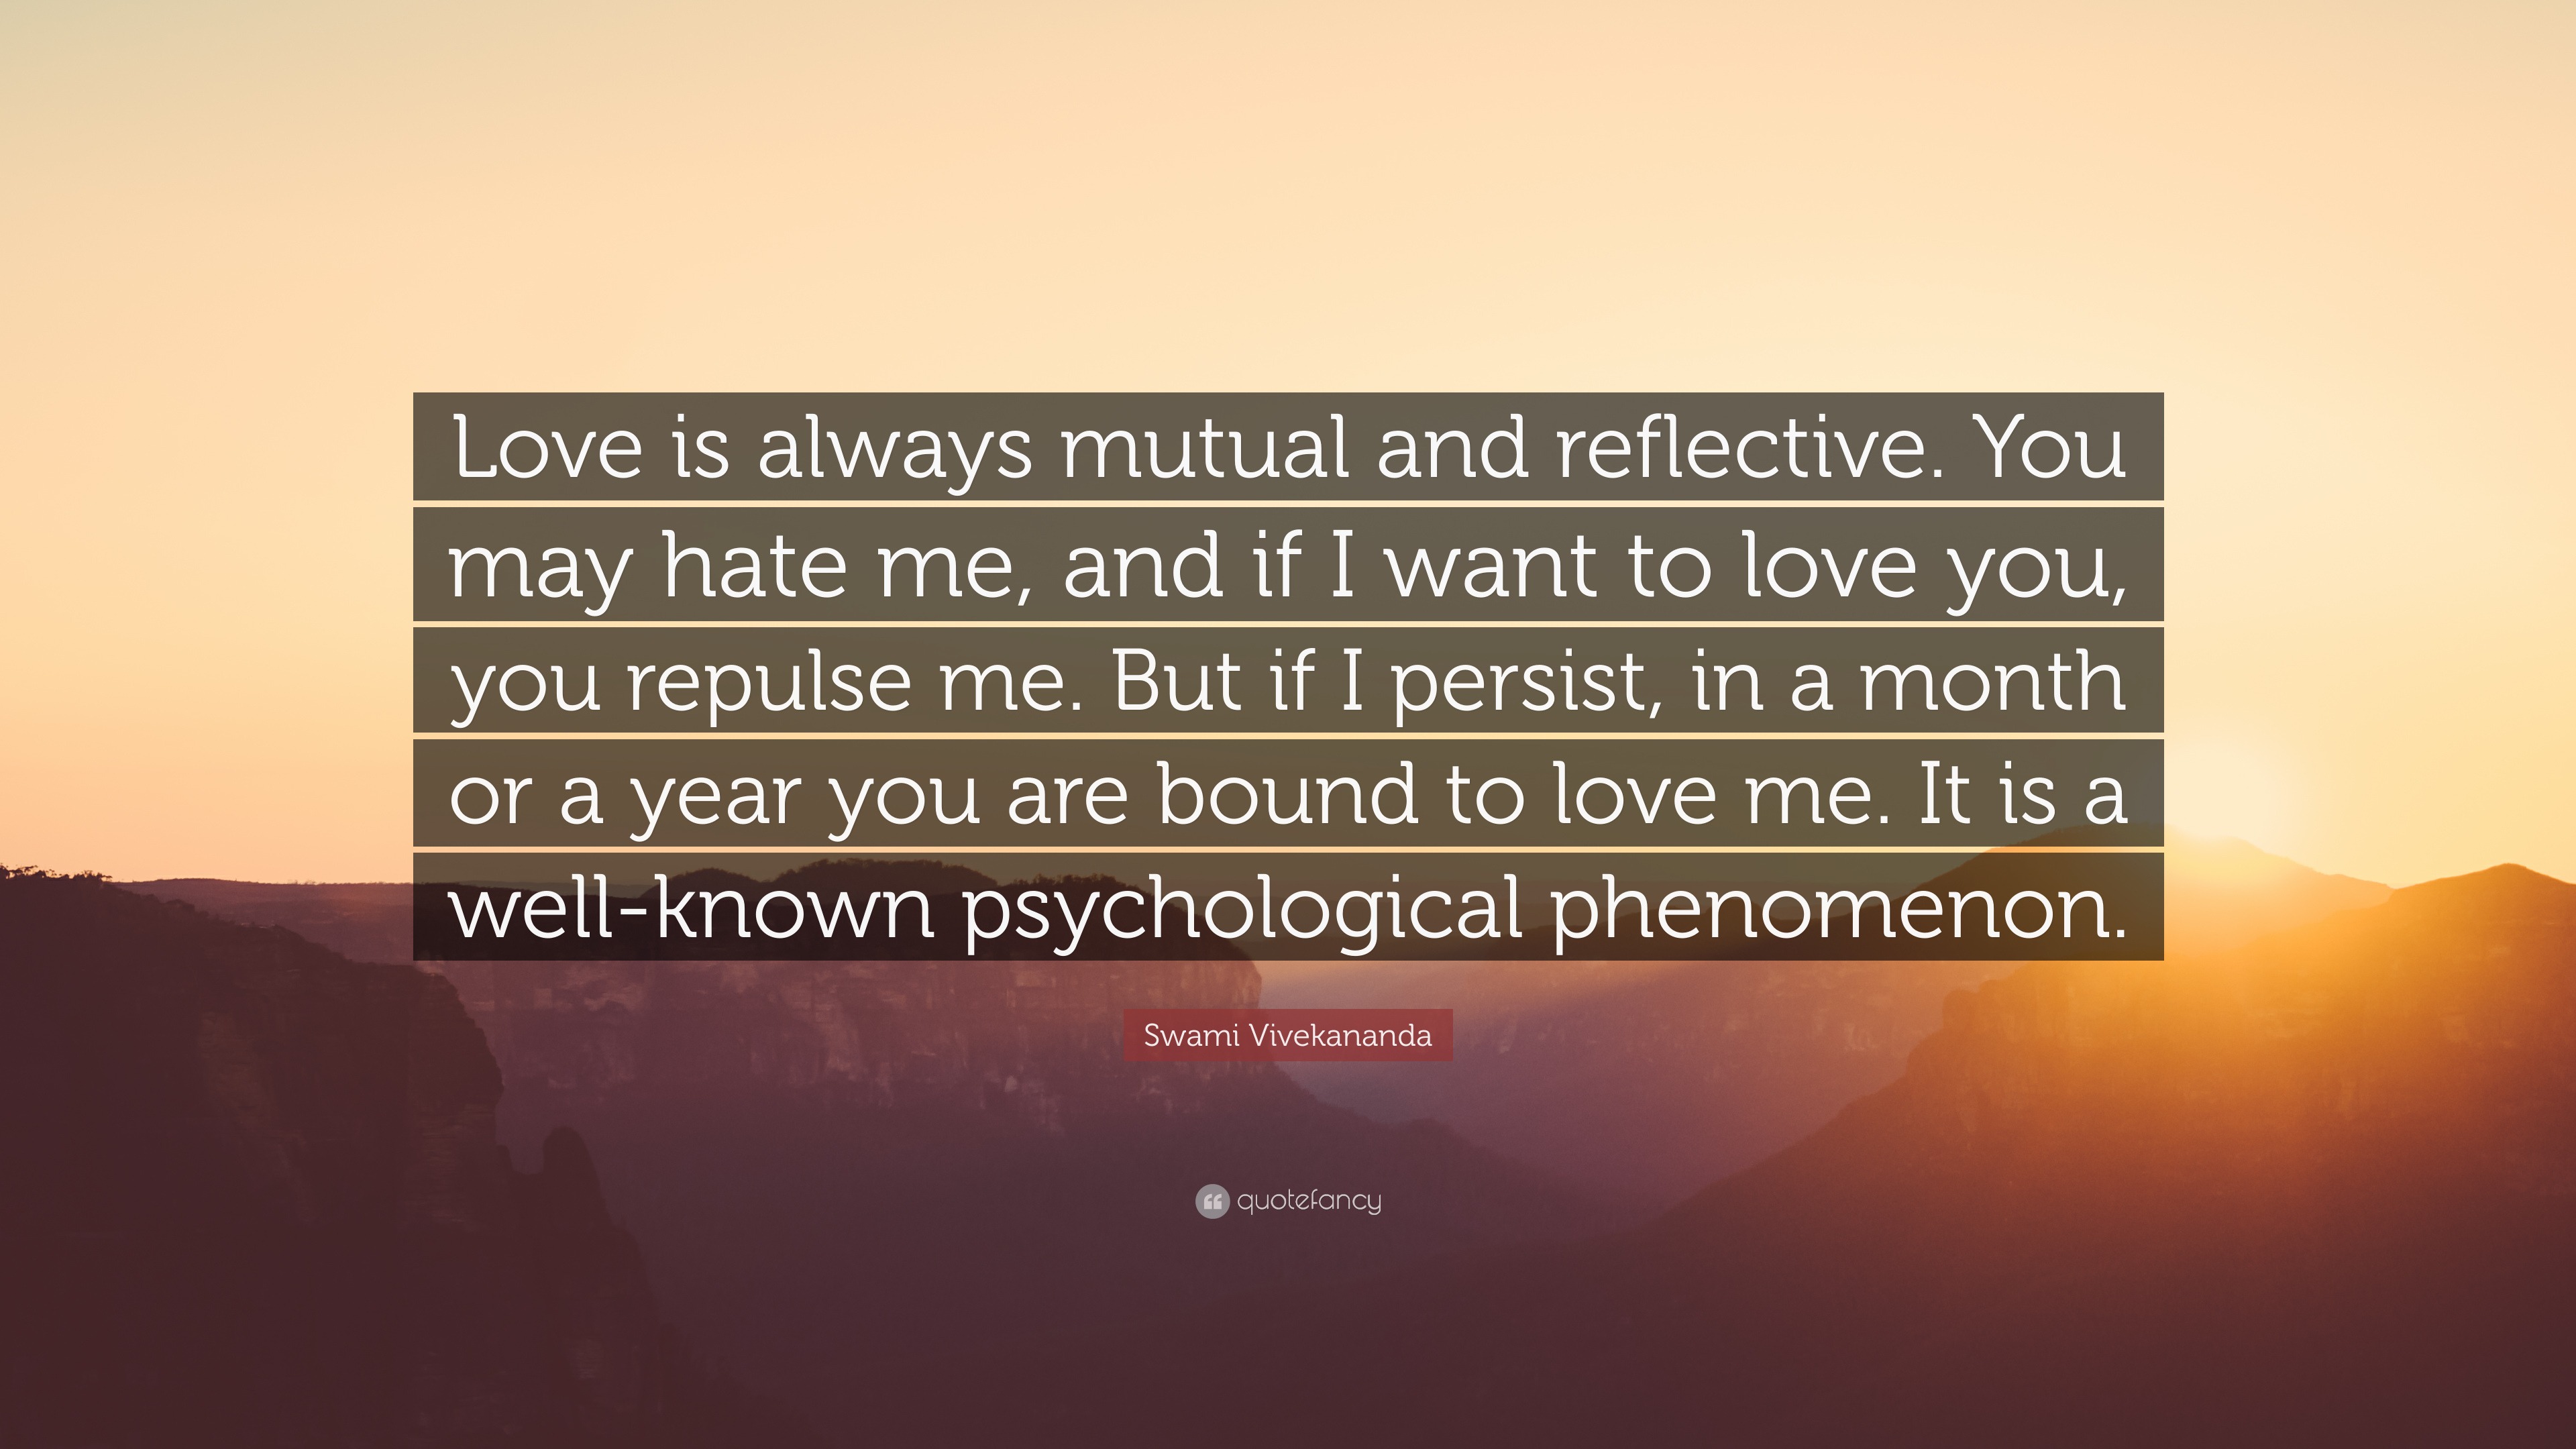 Swami Vivekananda Quote “Love is always mutual and reflective You may hate me